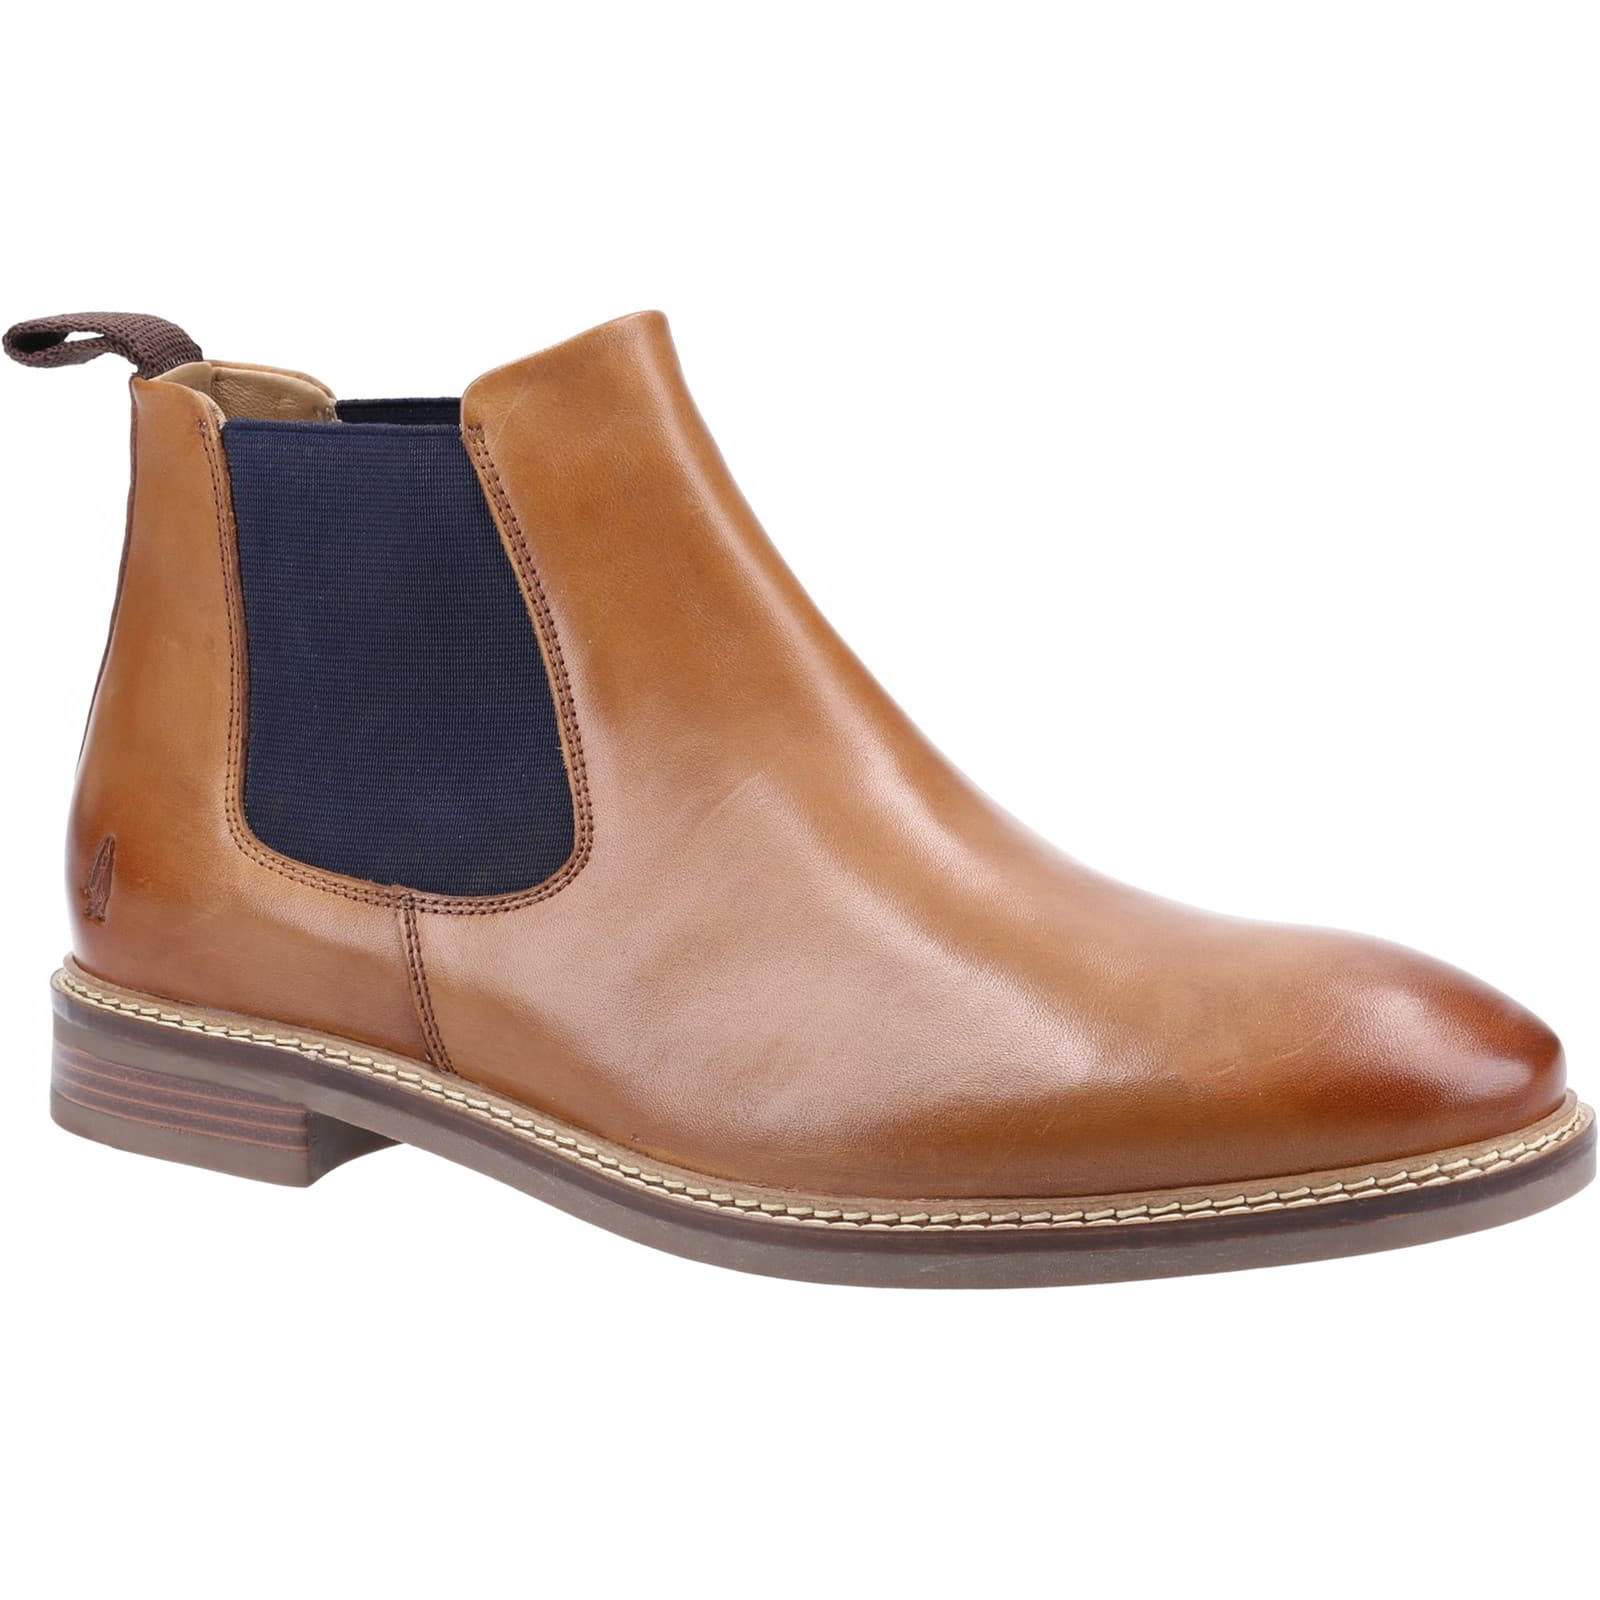 Hush Puppies Men's Blake Pull On Chelsea Ankle Boots - UK 11